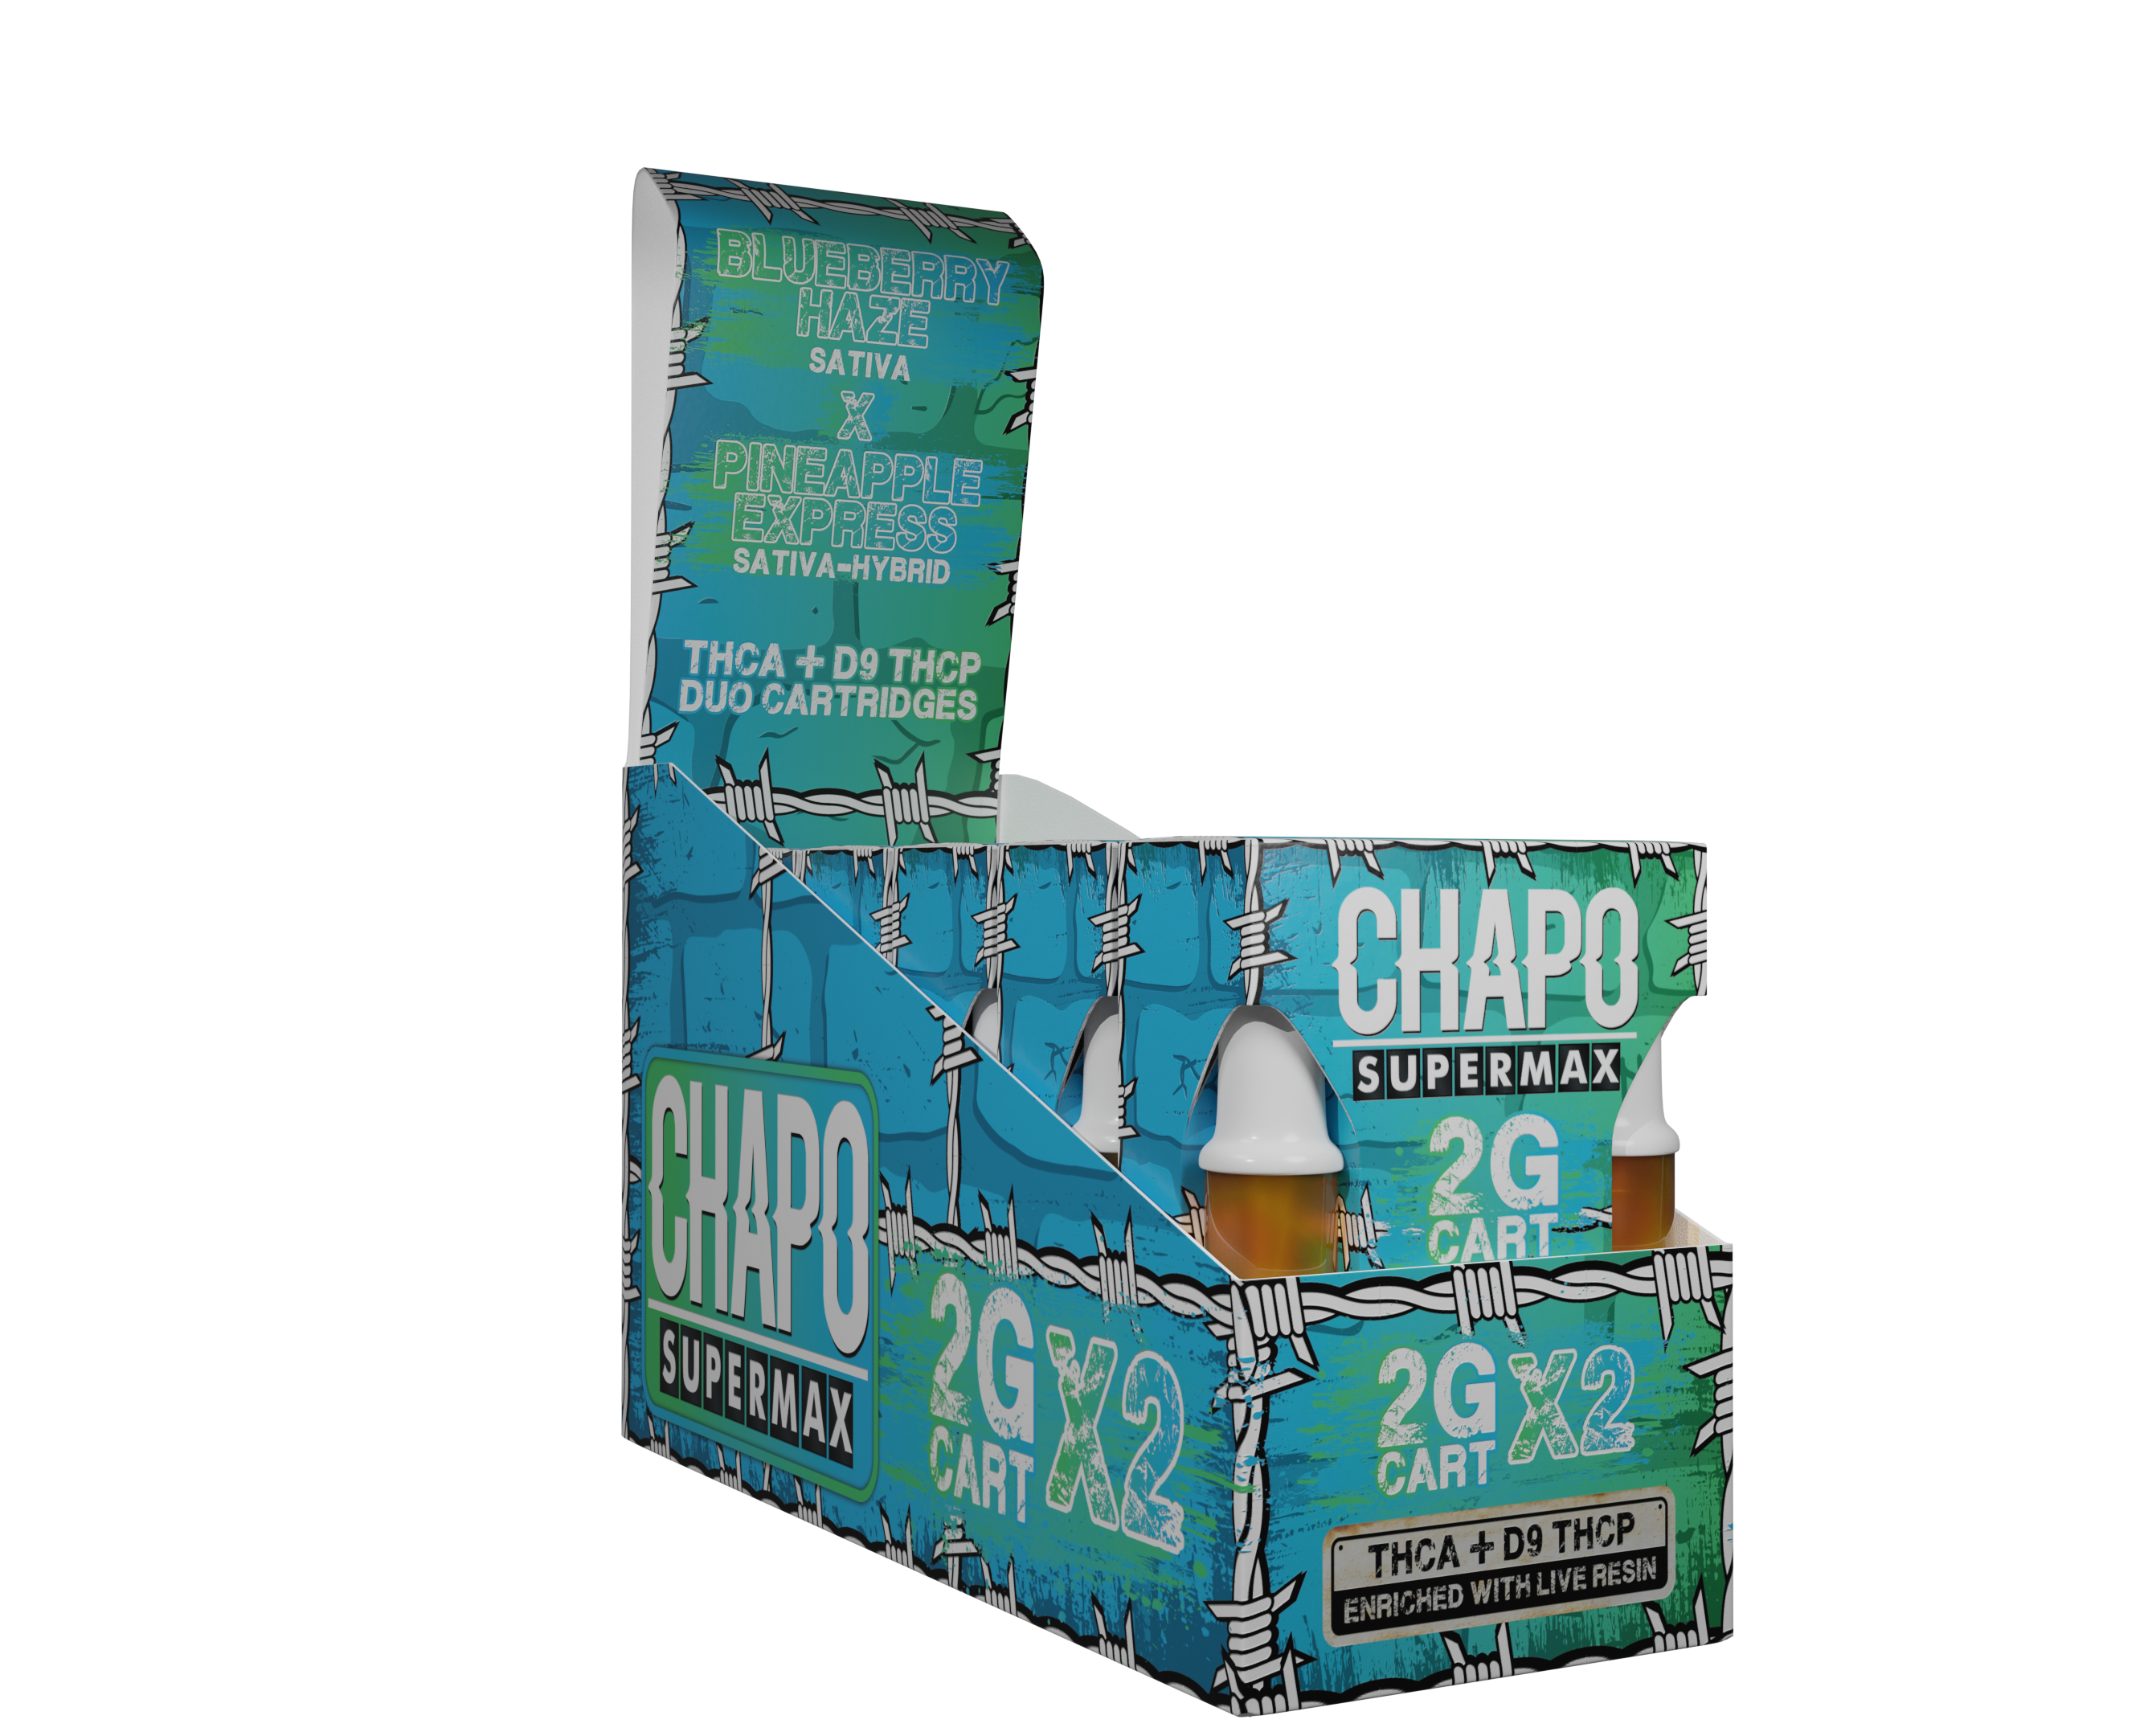 Chapo Supermax THC-A + D9 THC-P Enriched with Live Resin 2 Gram Duo Cartridges 6 pack - Vape Masterz